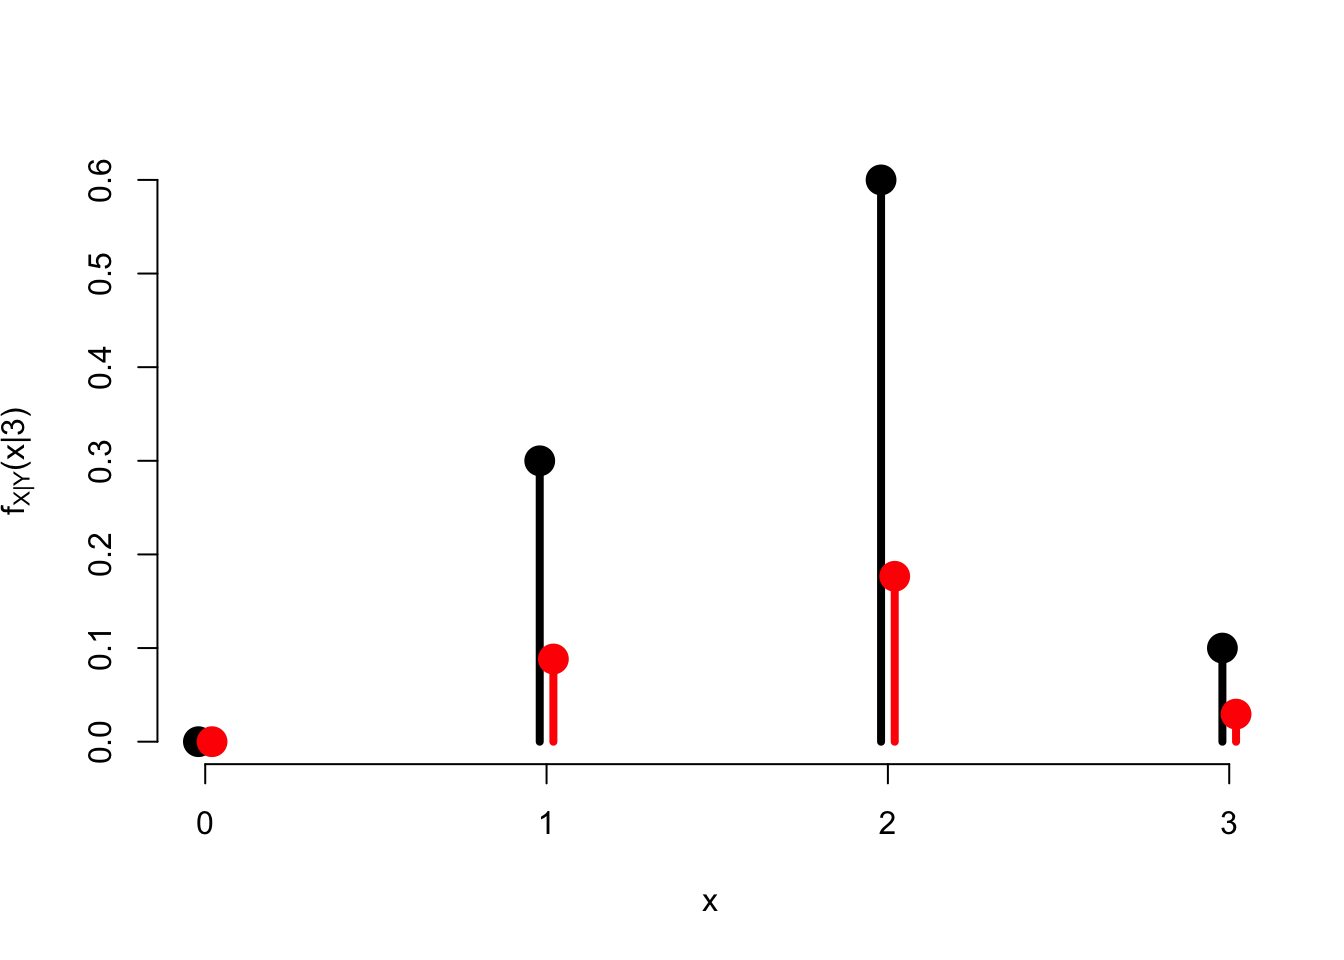 The joint distribution $f(x, 3)$ in red vs. the conditional distribution $f_{X|Y}(x|3)$ in black